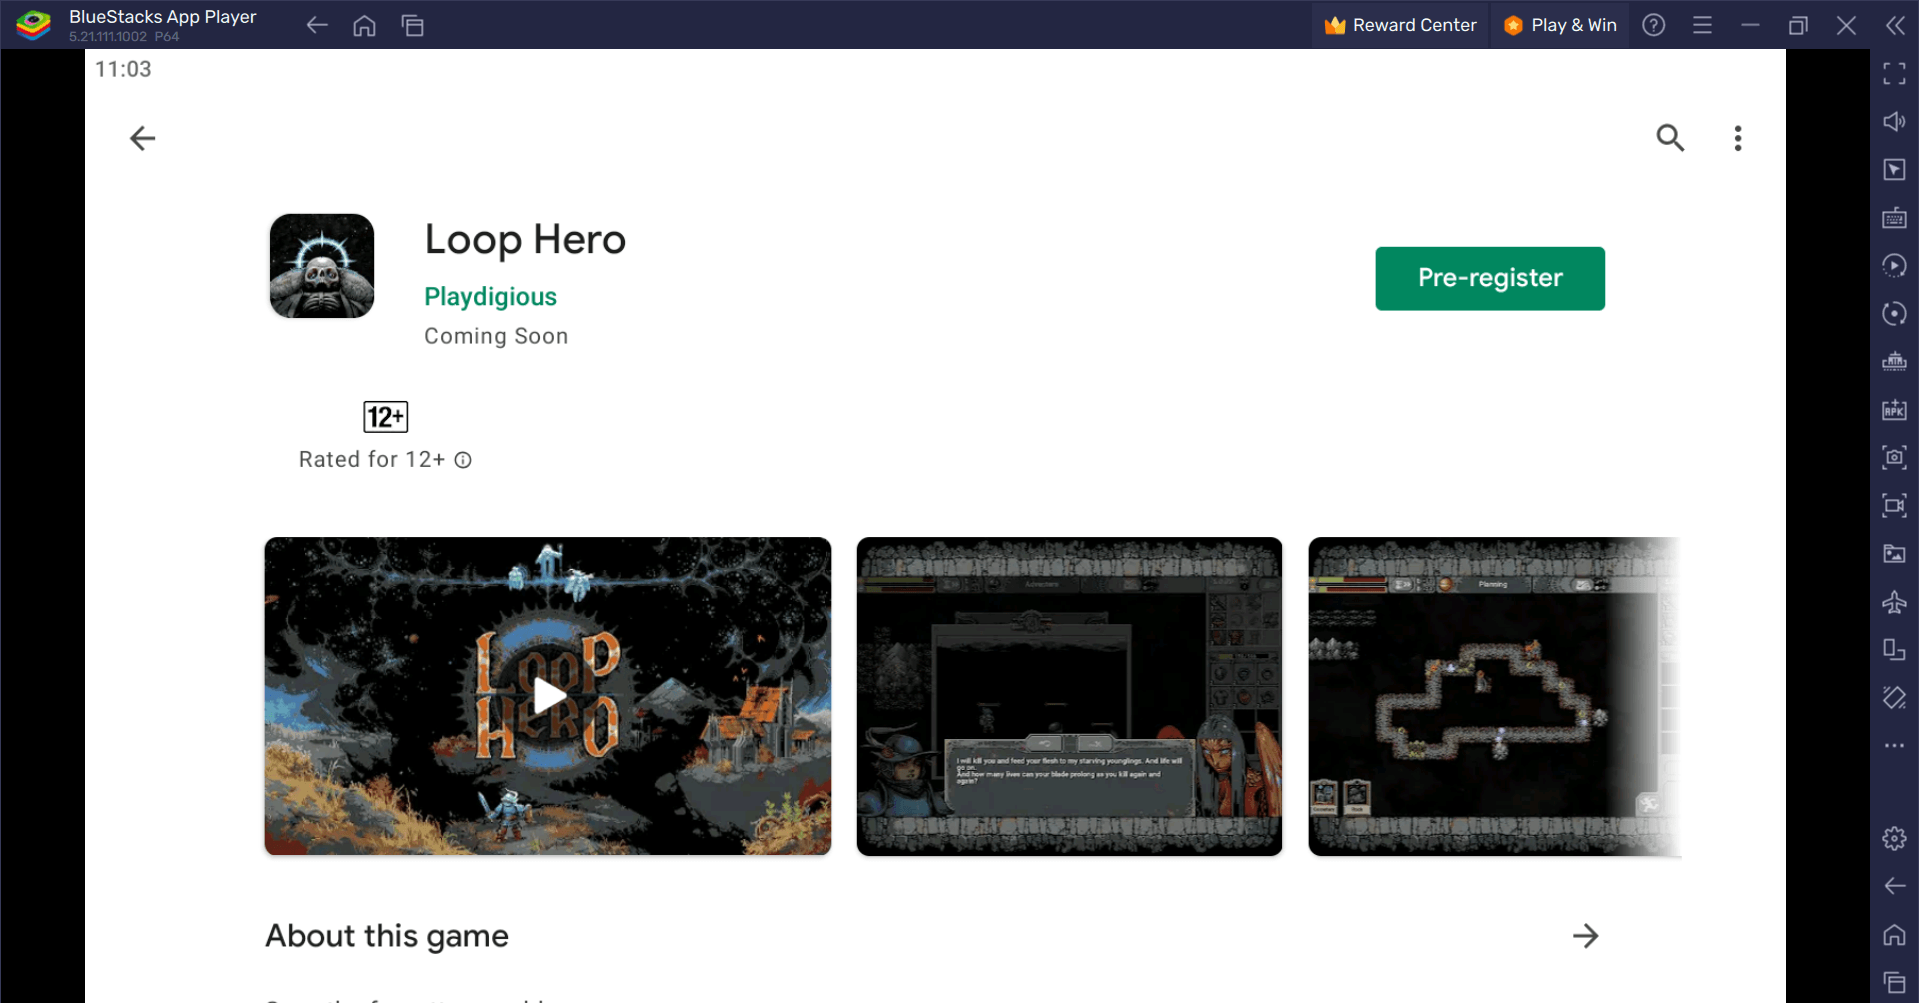 How to Play Loop Hero on PC with BlueStacks